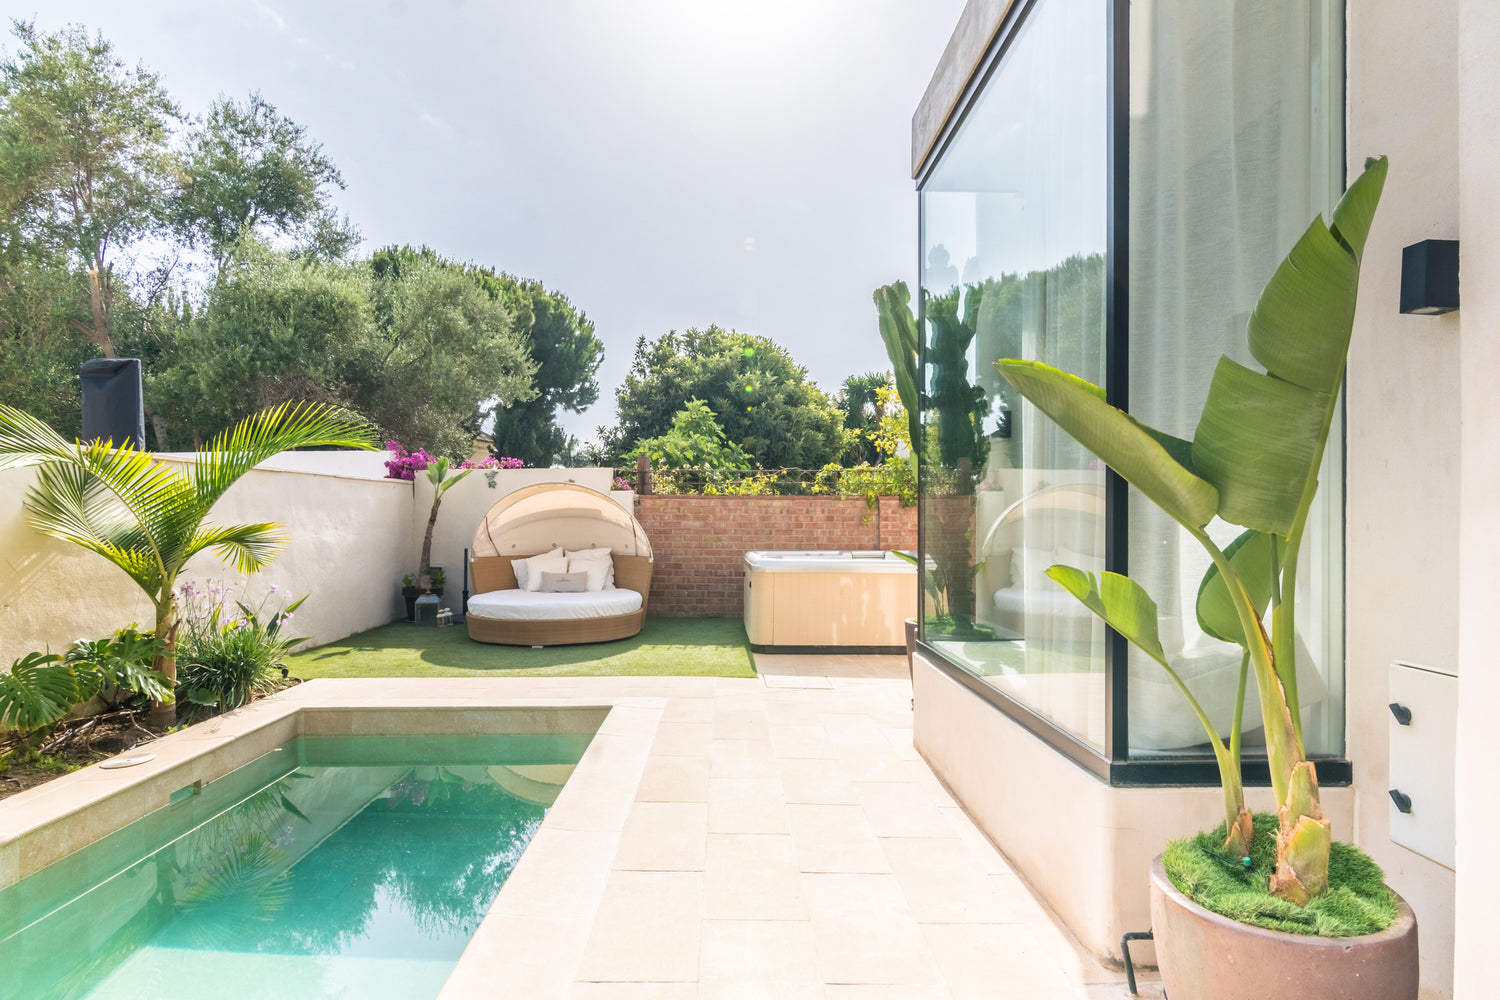 Pool and Jacuzzi of Villa, Marbella luxury Beach House short term rental, located on the beach side at Marbella´s exclusive Golden Mile just steps from the sea 